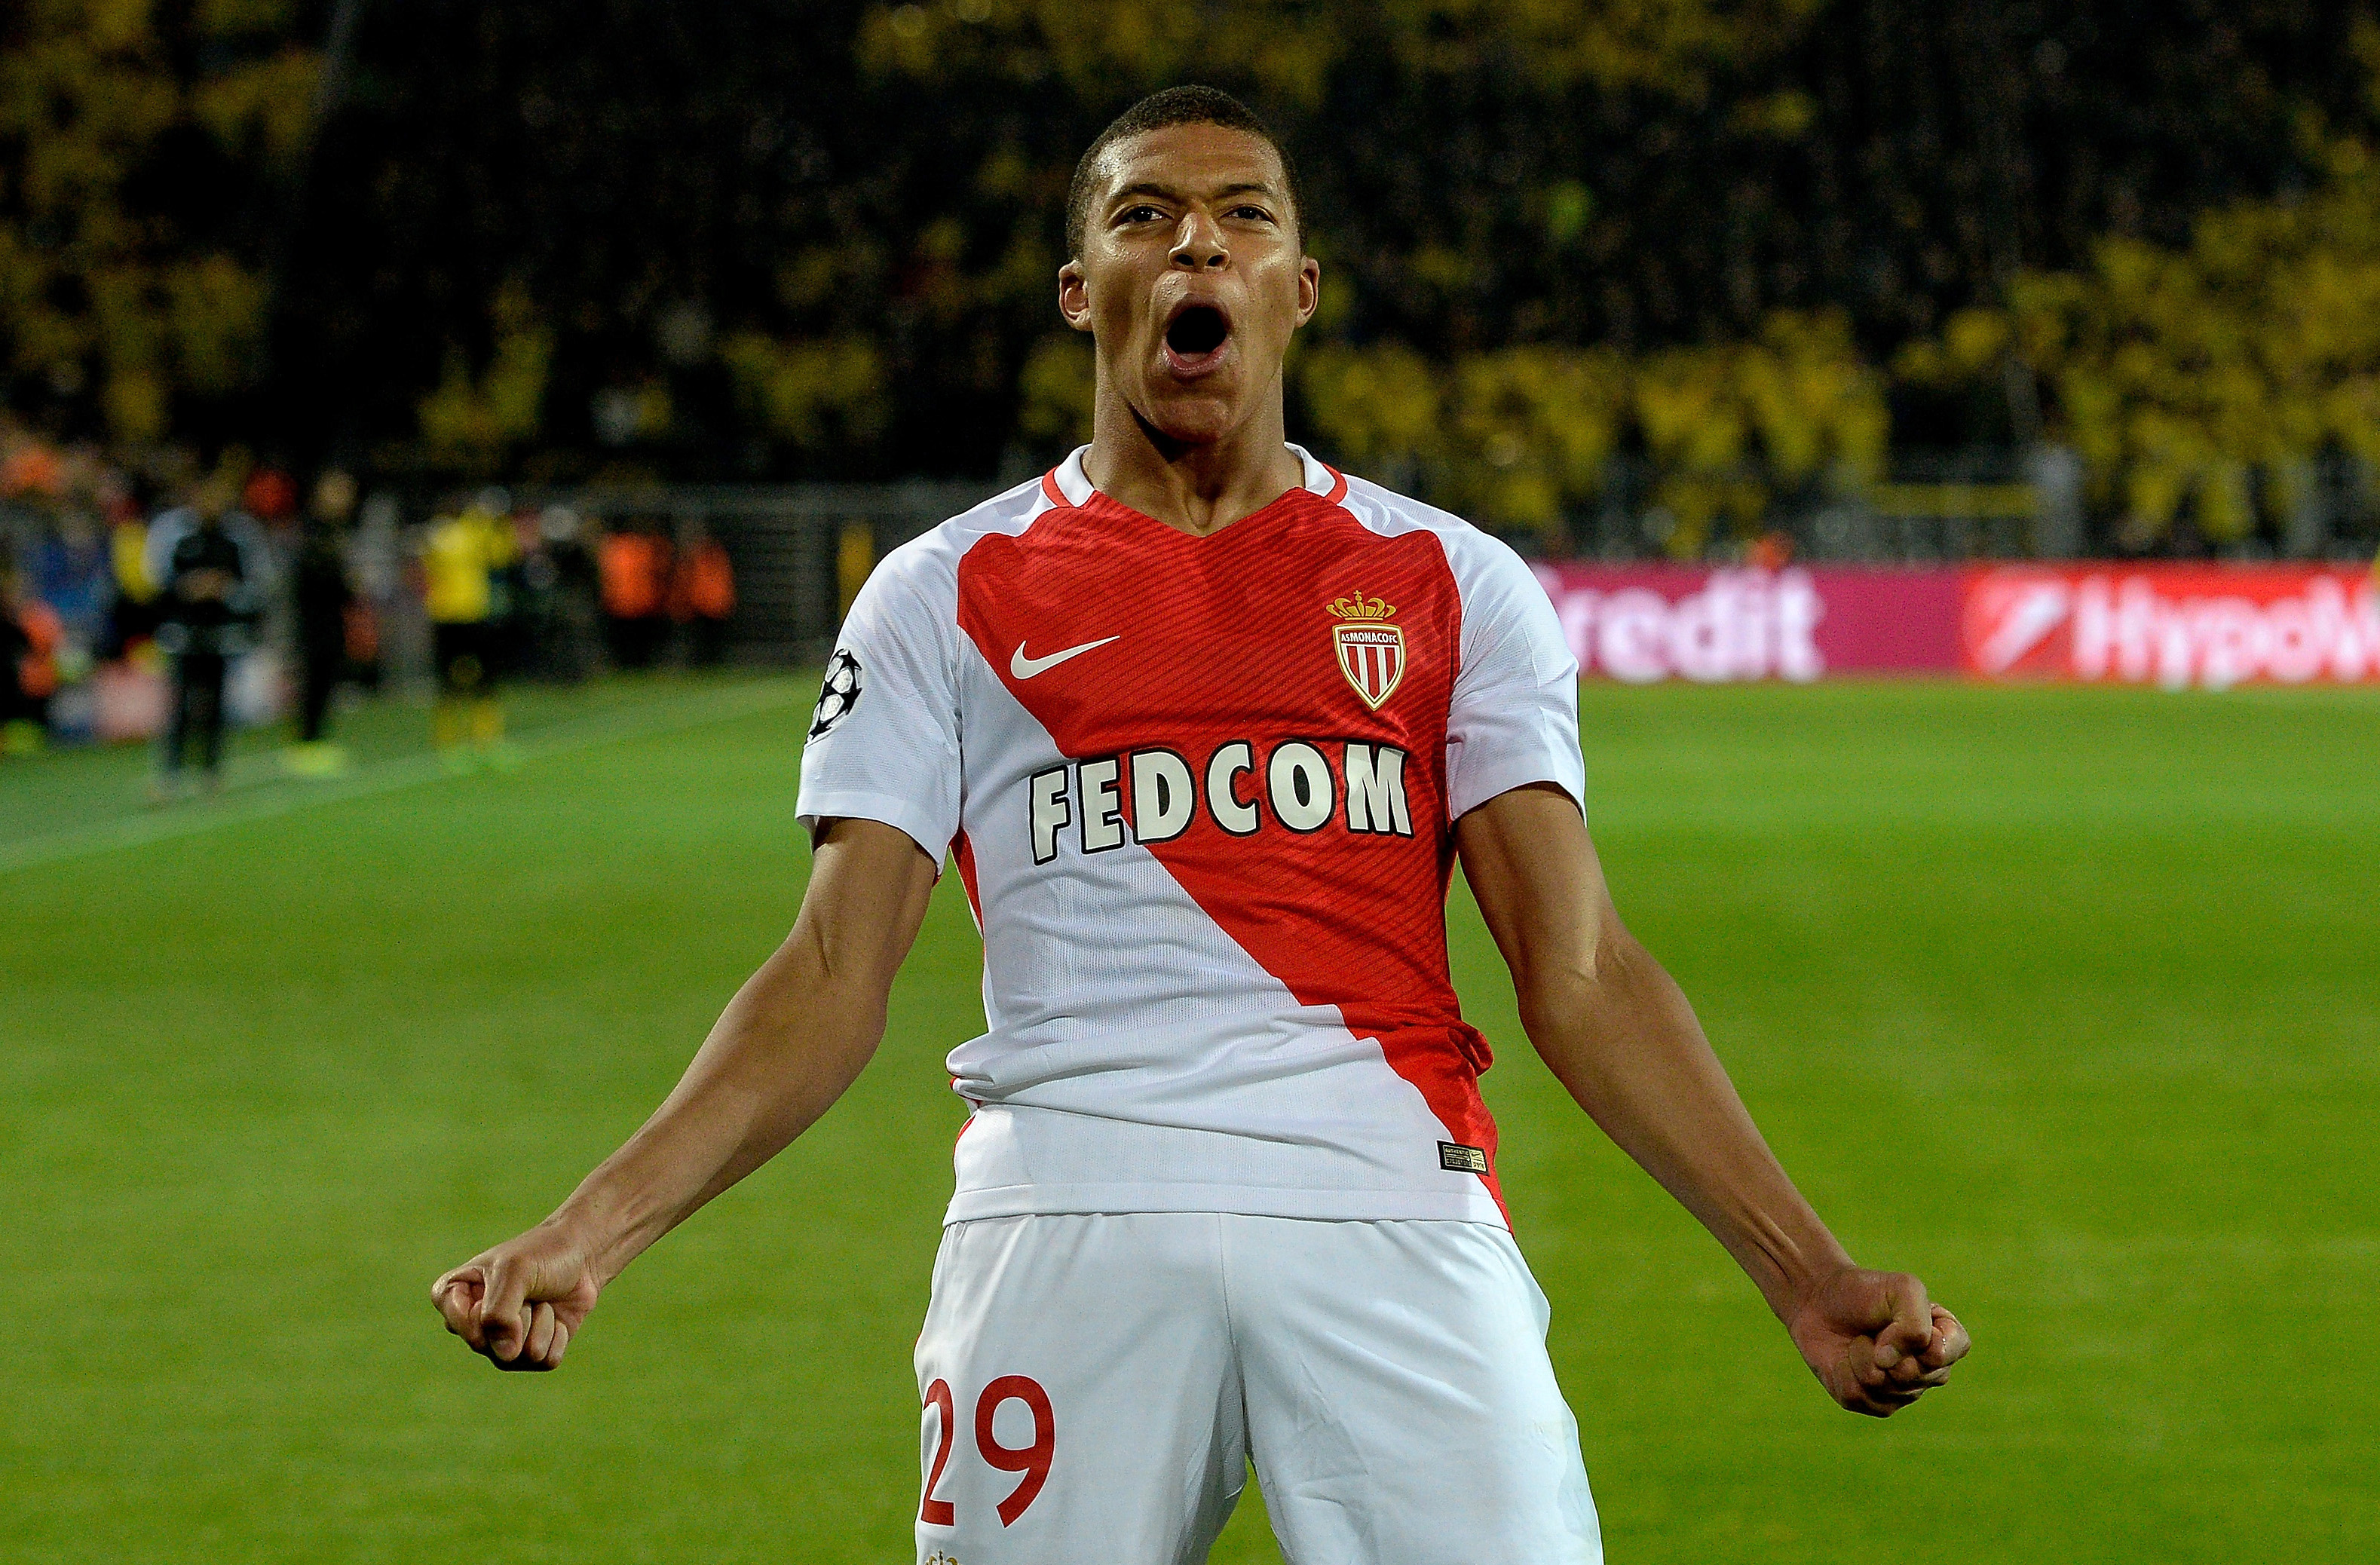 Former Monaco director: “He is not a surprise, he’s always been a talented player.”